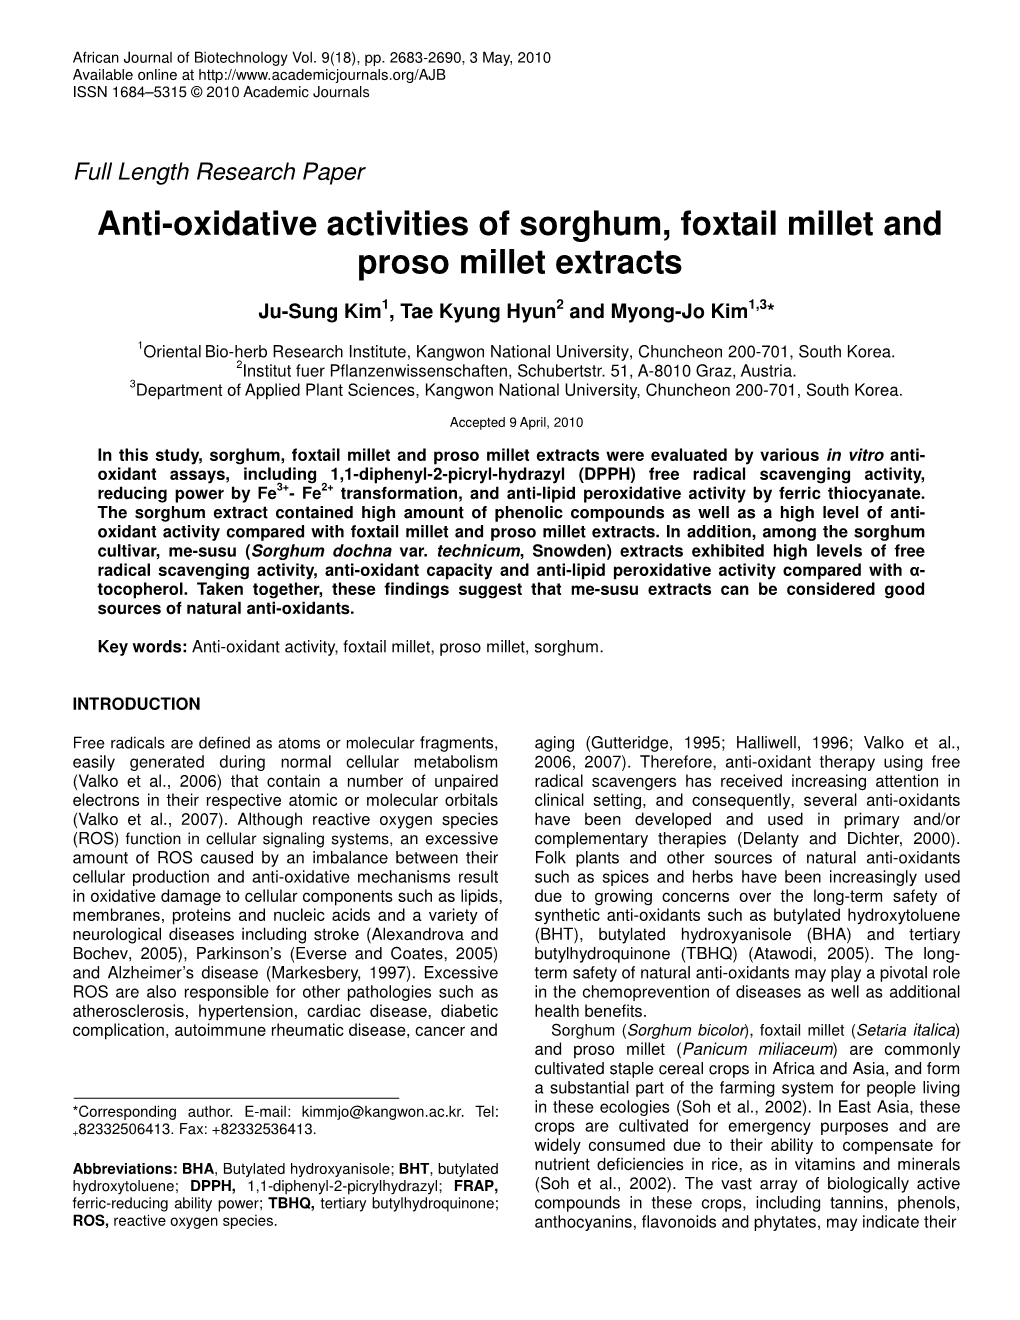 Anti-Oxidative Activities of Sorghum, Foxtail Millet and Proso Millet Extracts